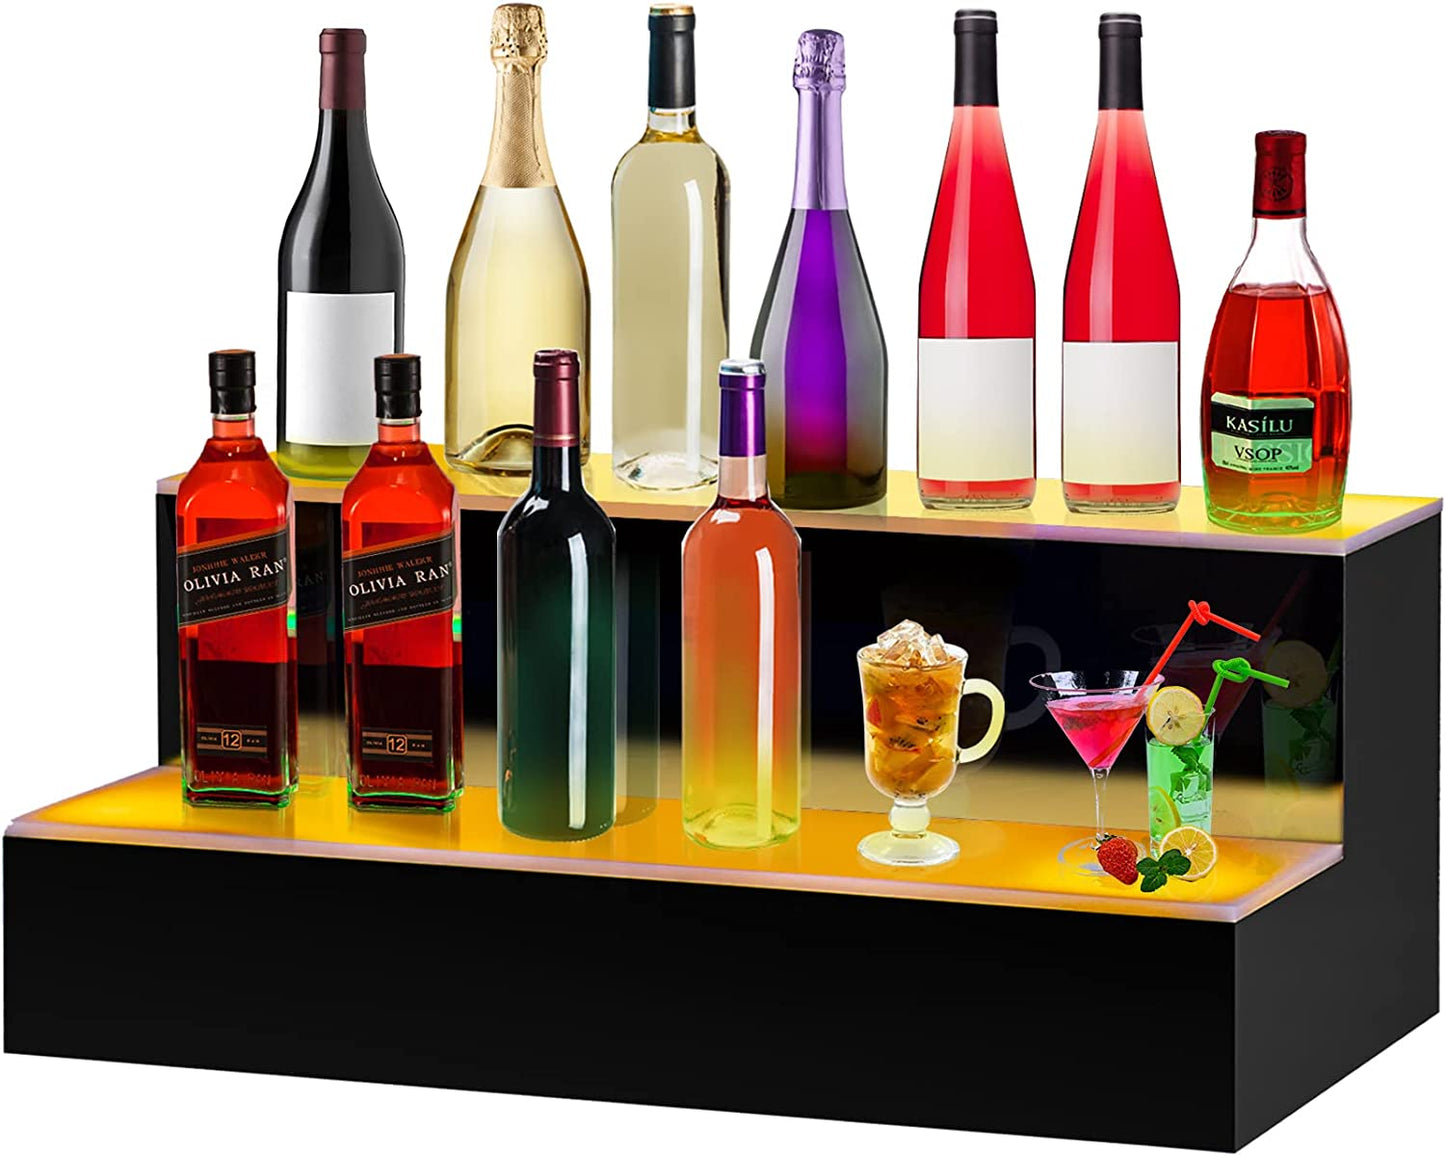 LED Lighted Liquor Bottle Display Shelf, 40-Inch LED Bar Shelves for Liquor, 2-Step Lighted Liquor Bottle Shelf for Home/Commercial Bar, Acrylic Lighted Bottle Display with Remote & App Control